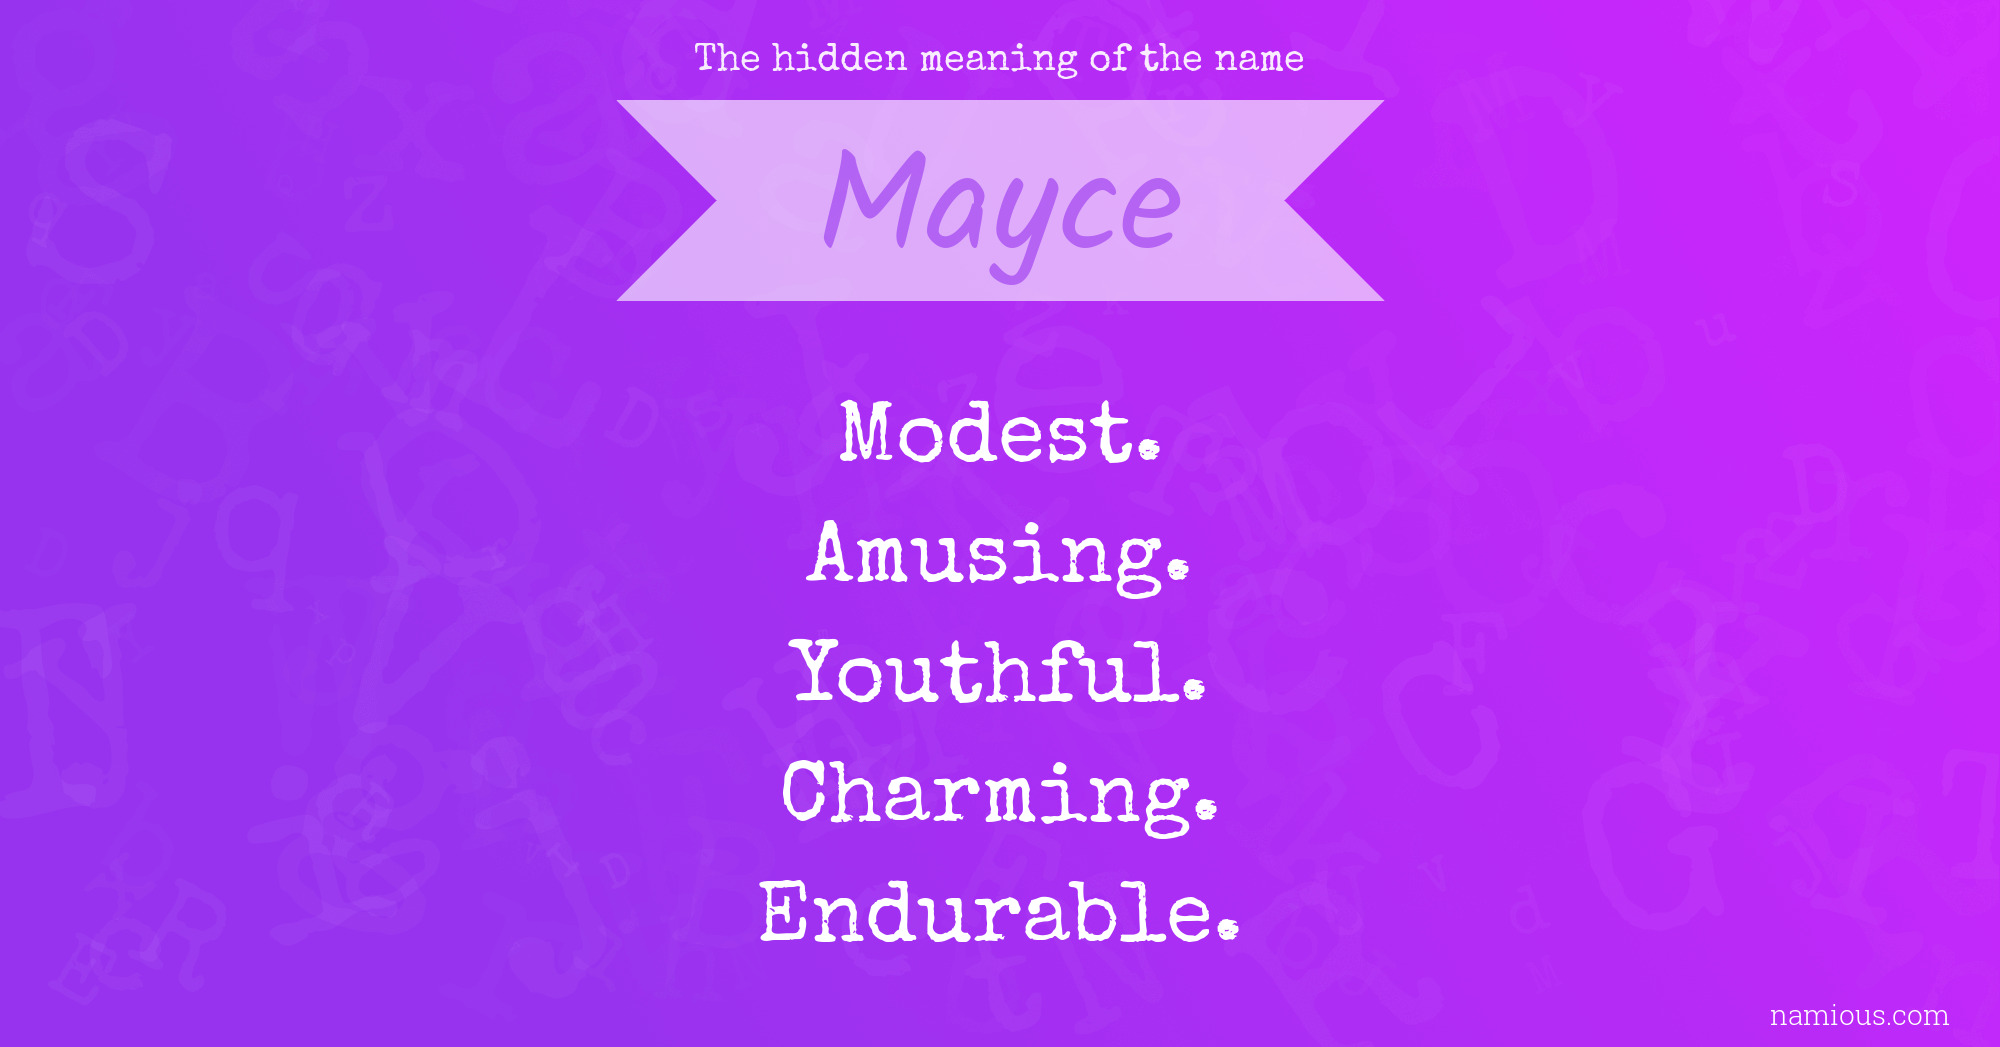 The hidden meaning of the name Mayce